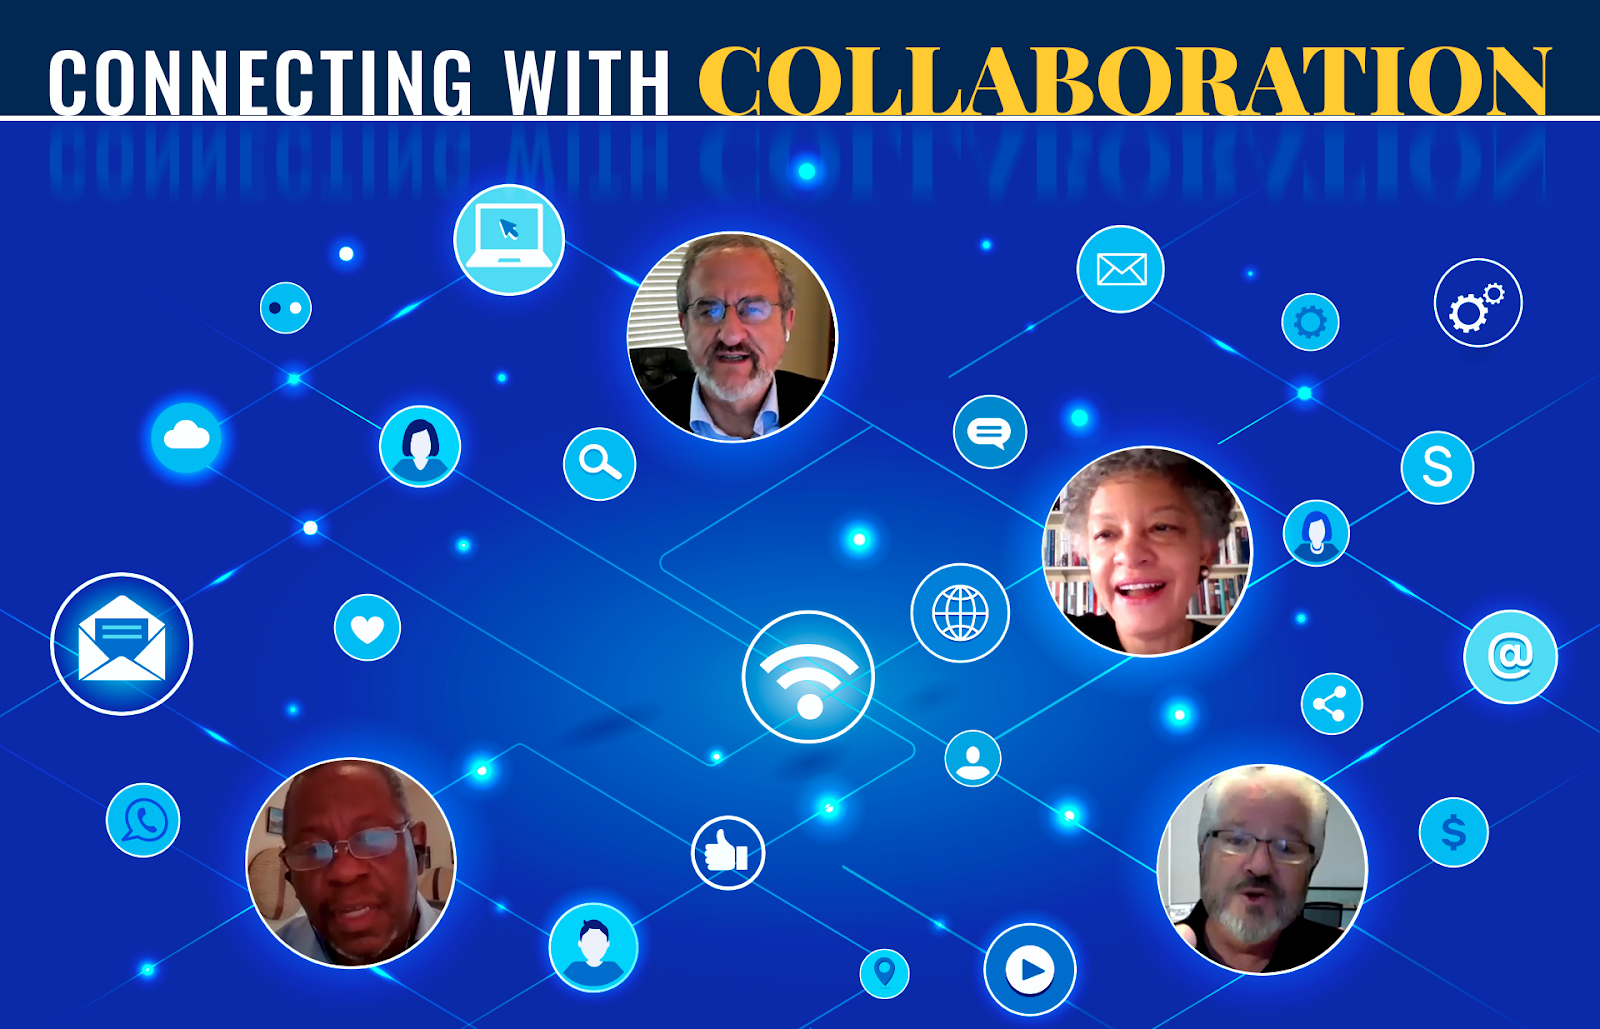 Blue Background with interconnected circles with photos of leaders and headline “Connecting with Collaboration”